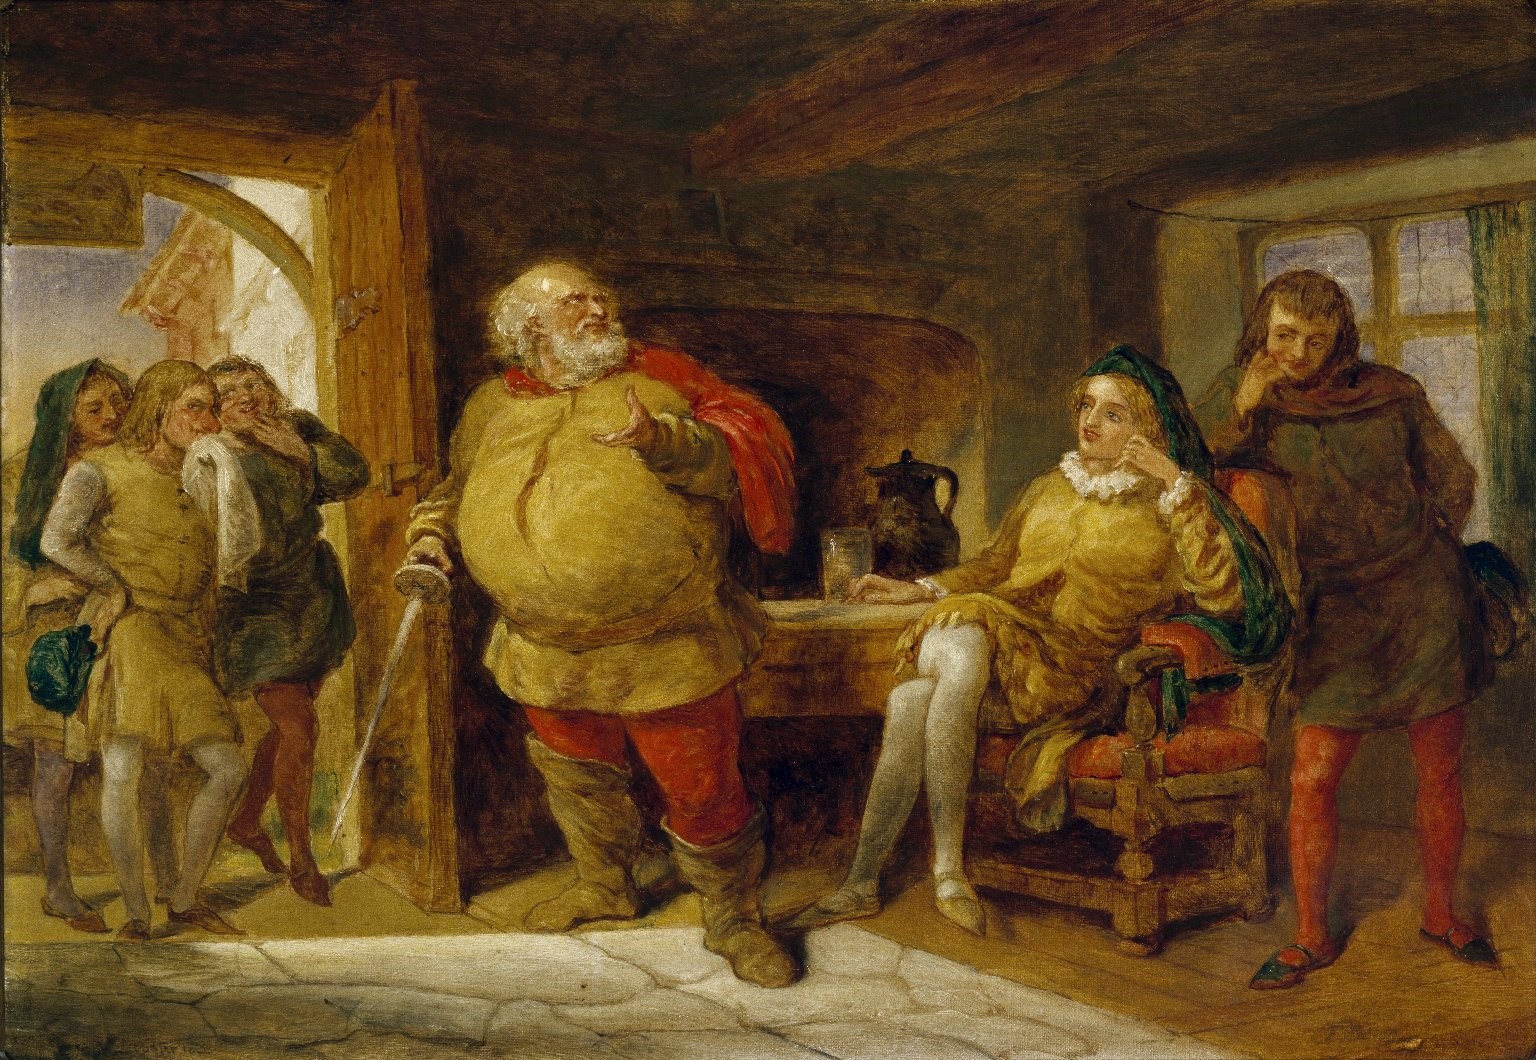 A painting of Santa Claus conversing with Tolkien enthusiasts in a room.